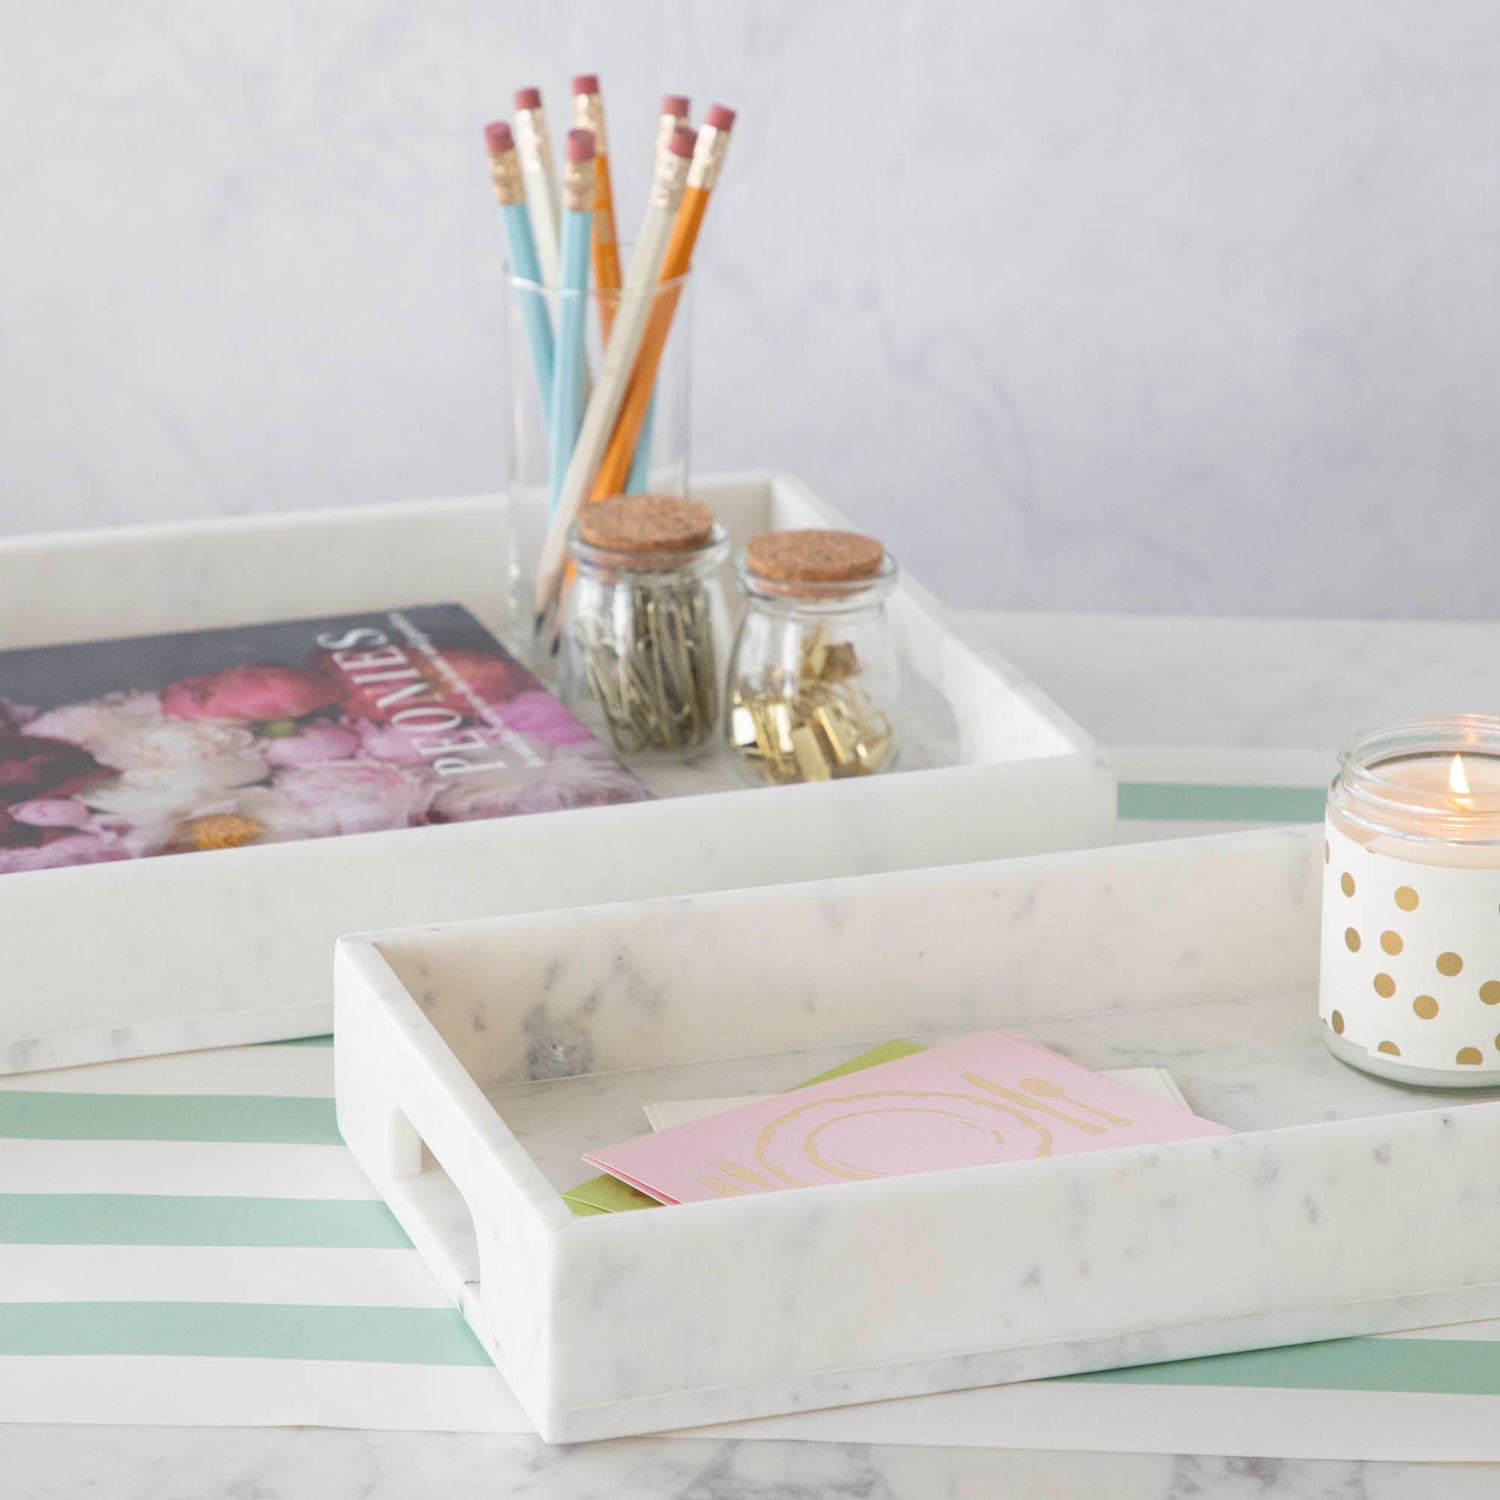 Two Godinger White Marble Rectangular Trays on a striped surface, one holding art supplies and the other candles and a small jar, showcasing the elegance of marble.